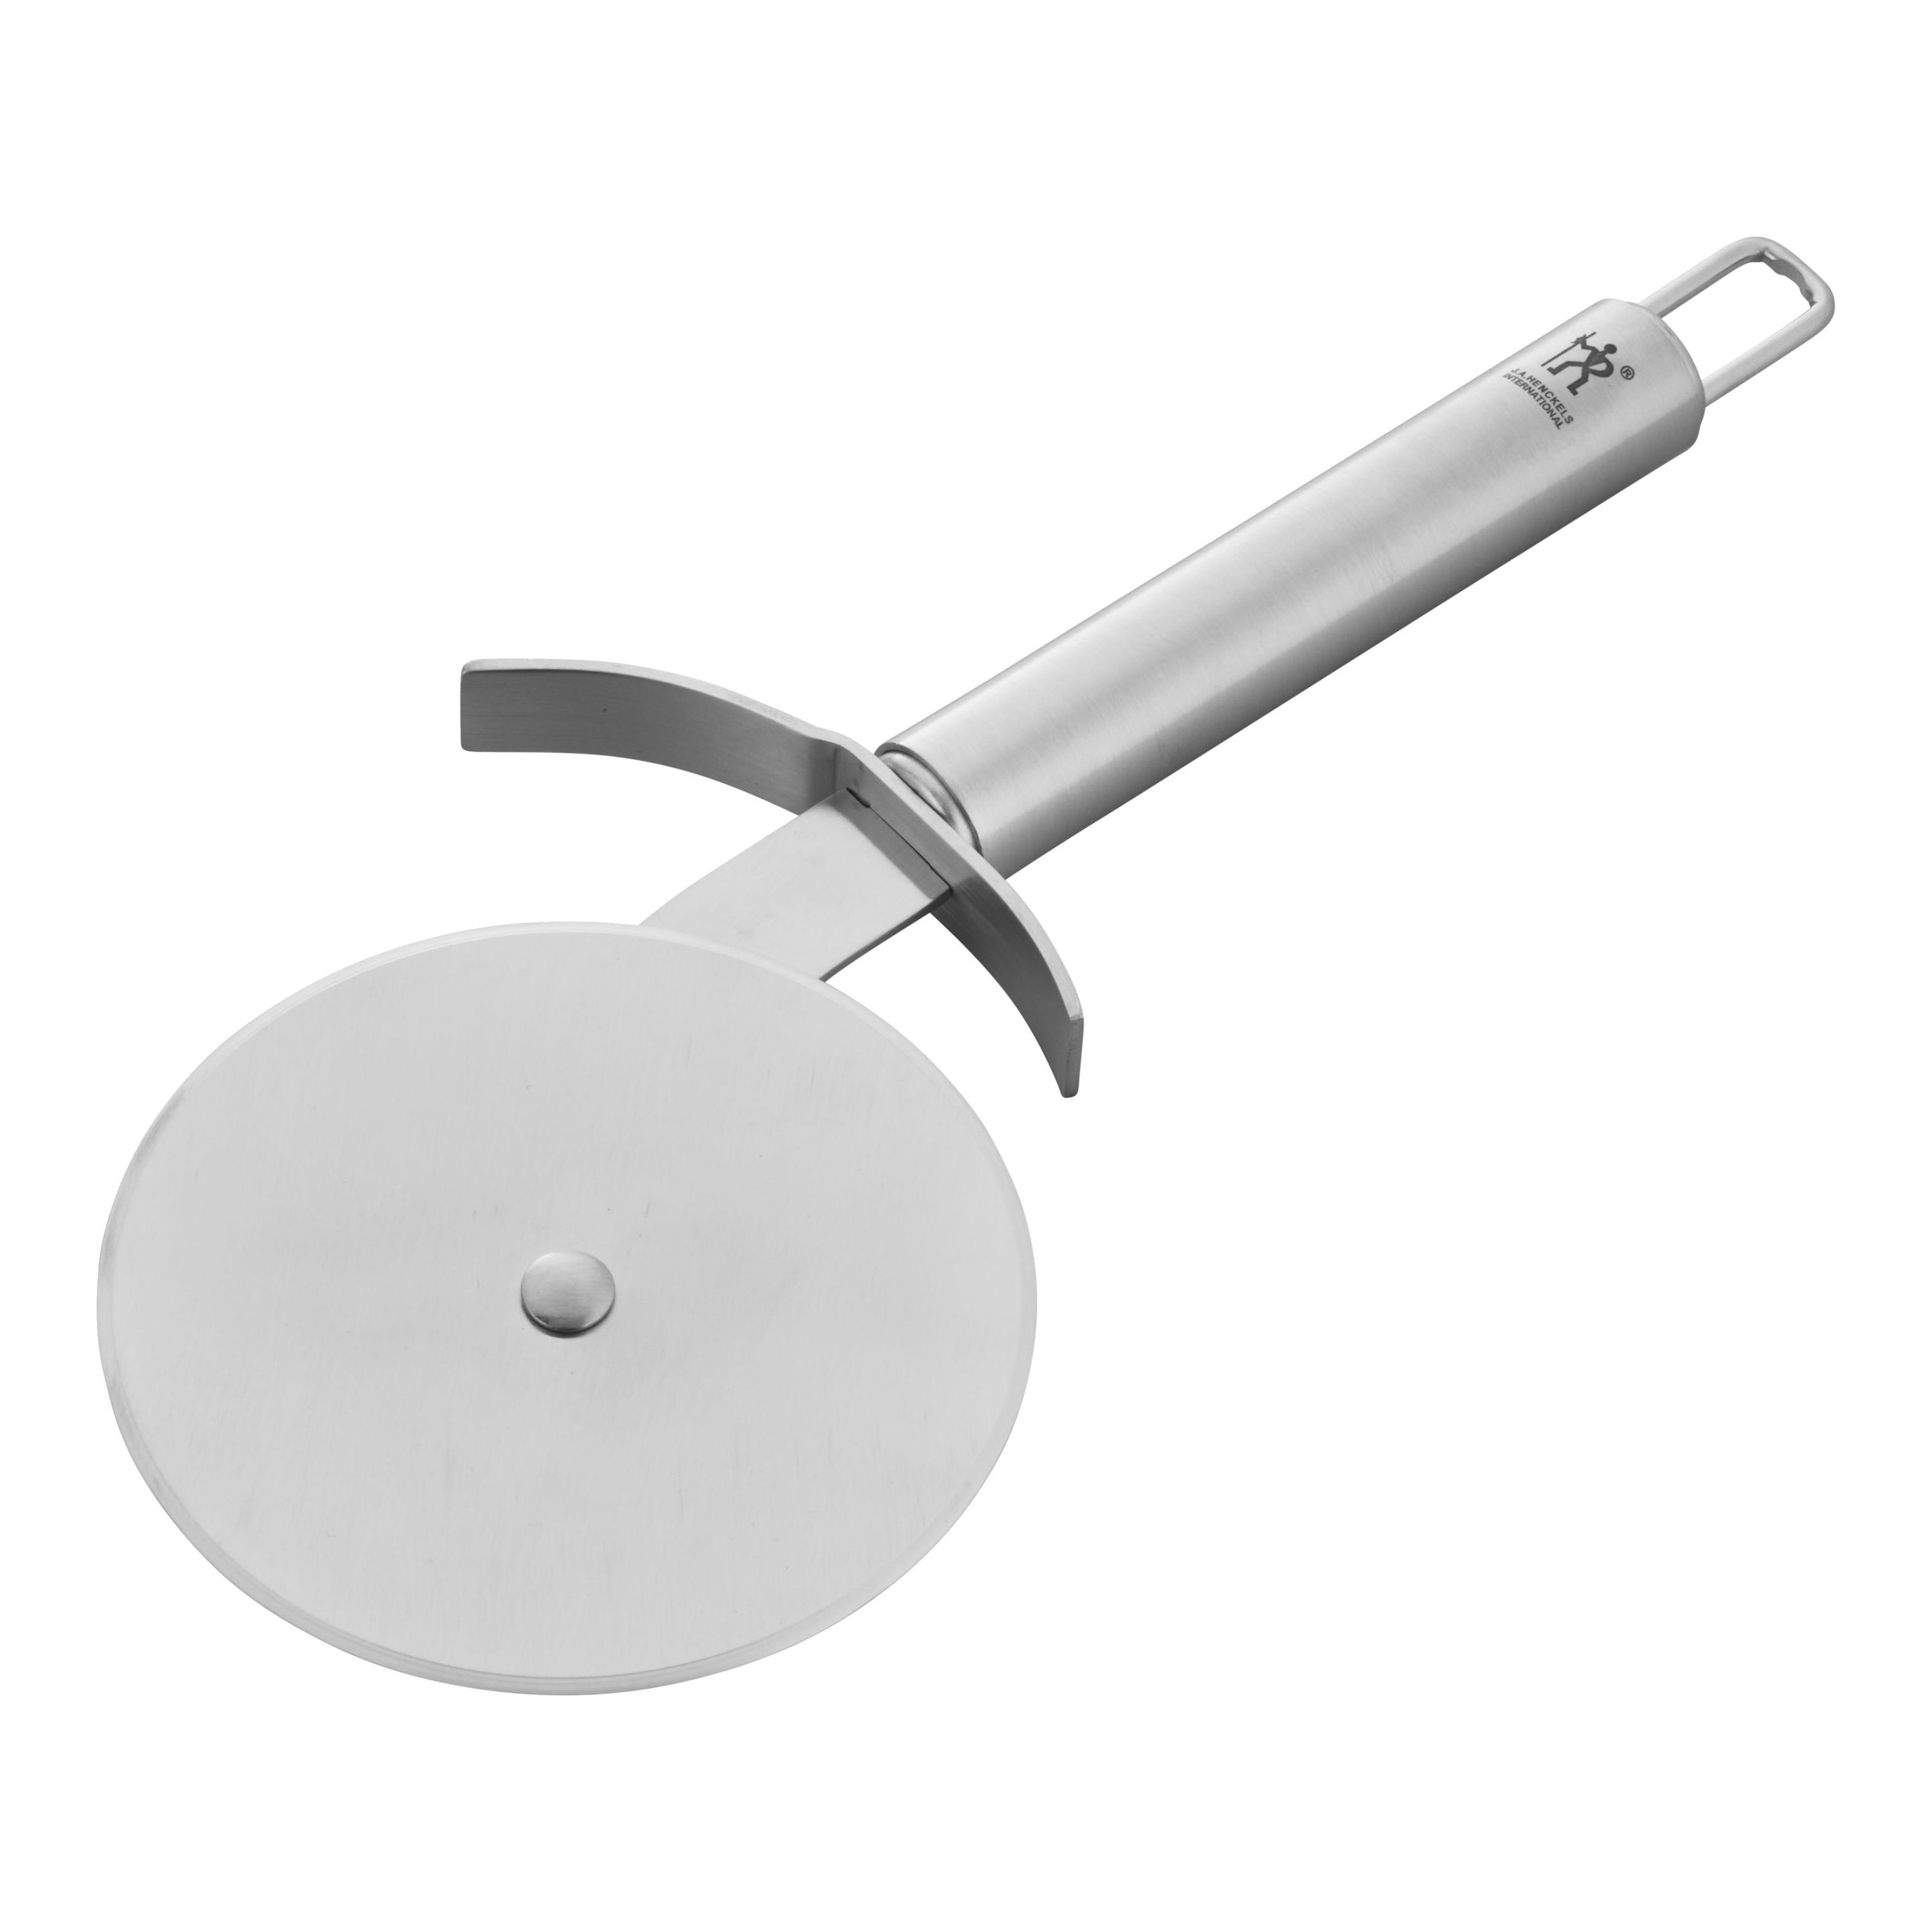 Stainless Steel Pizza Cutter Grip Handle Easy Cut Roller Slicer Cutting Wheel